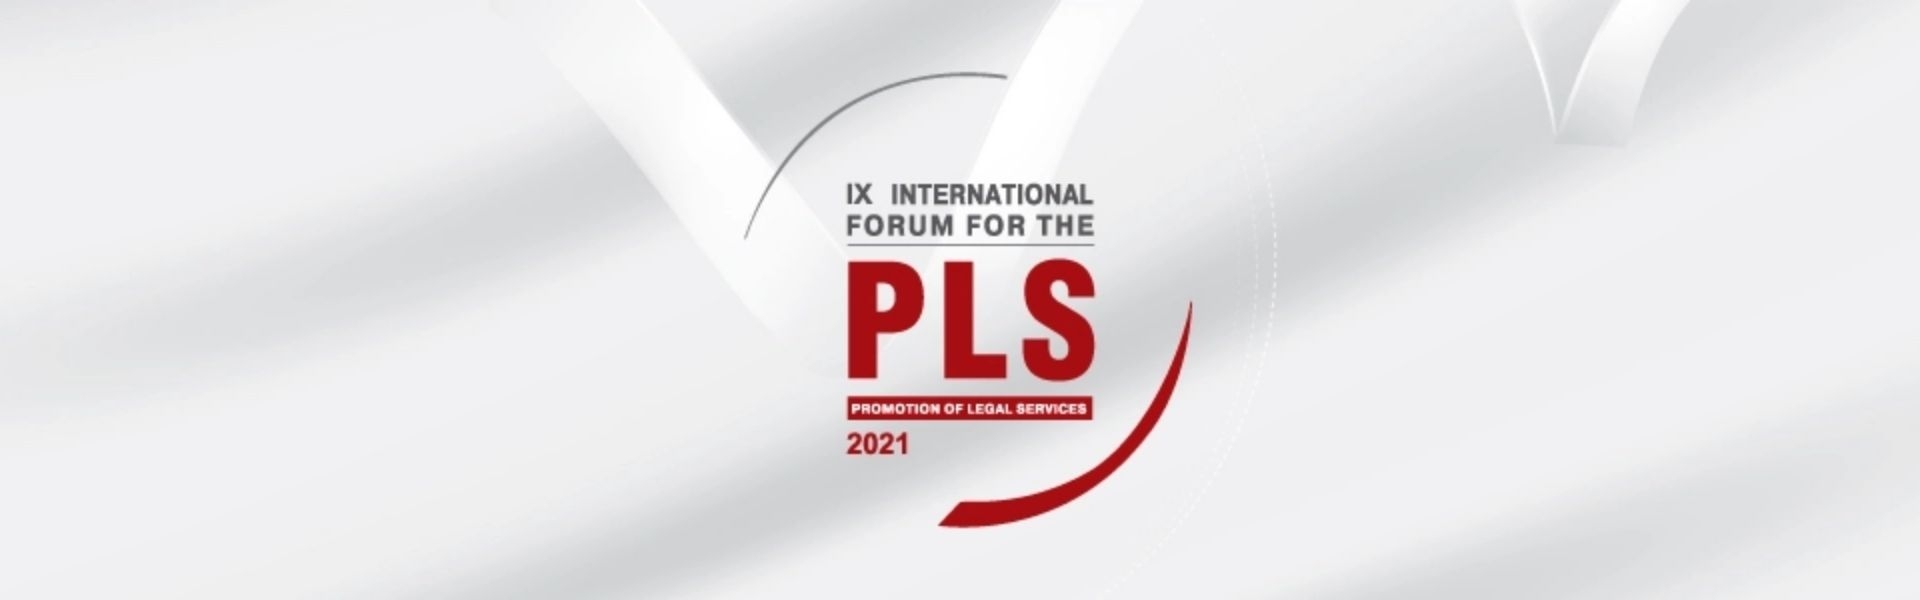 IX International Forum of the Legal Services Promotion